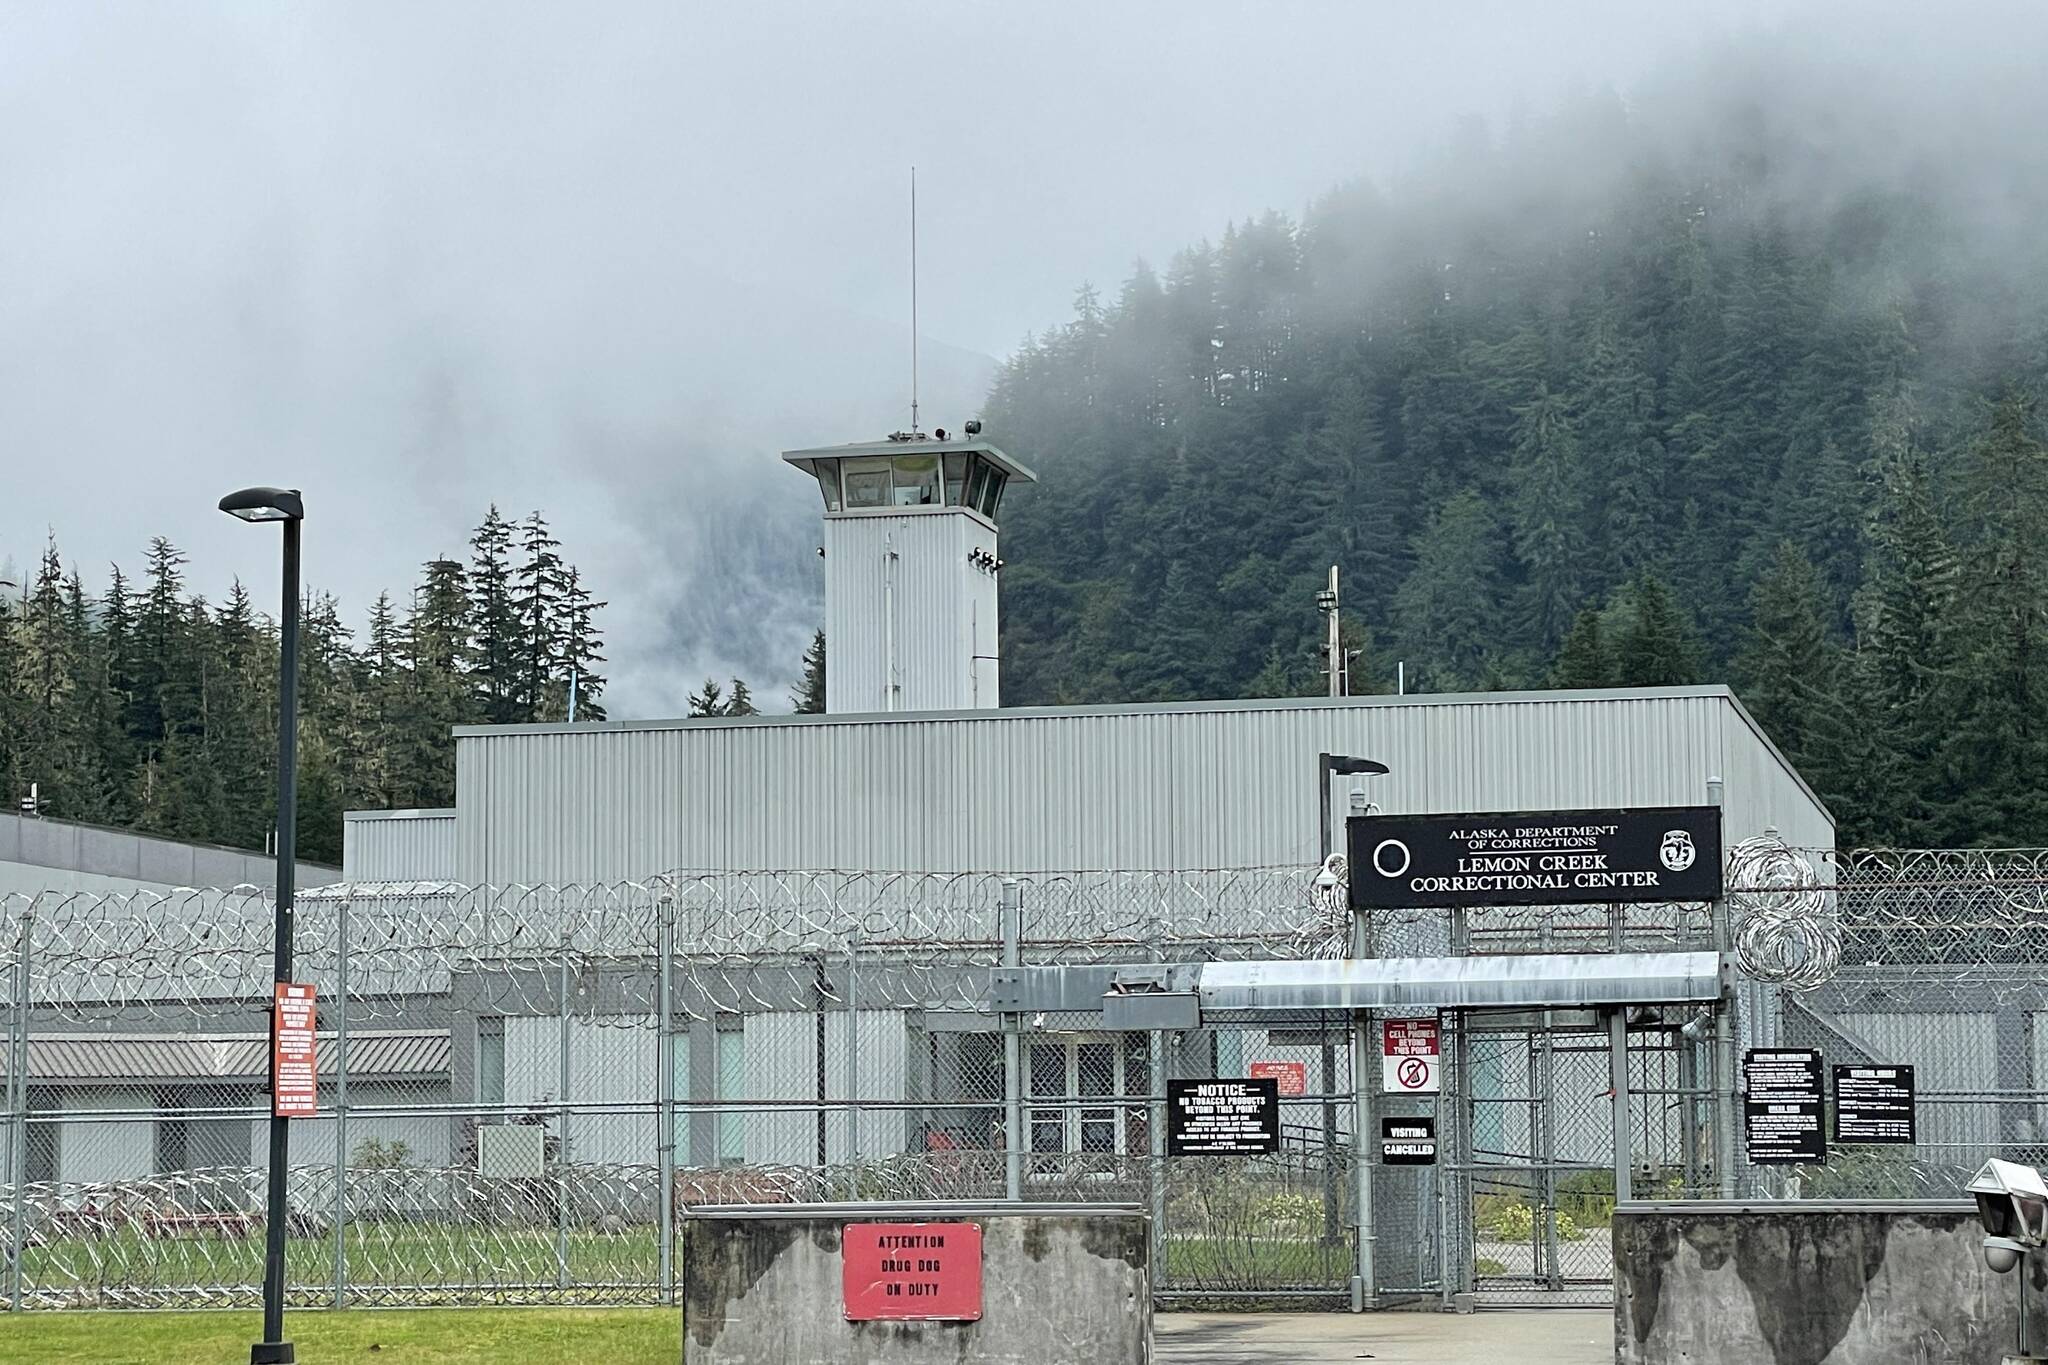 Michael S. Lockett / Juneau Empire 
Lemon Creek Correctional Center in Juneau is the site of an outbreak of the coronavirus with at least 23 active case as of Sept. 16, said a Department of Corrections official.